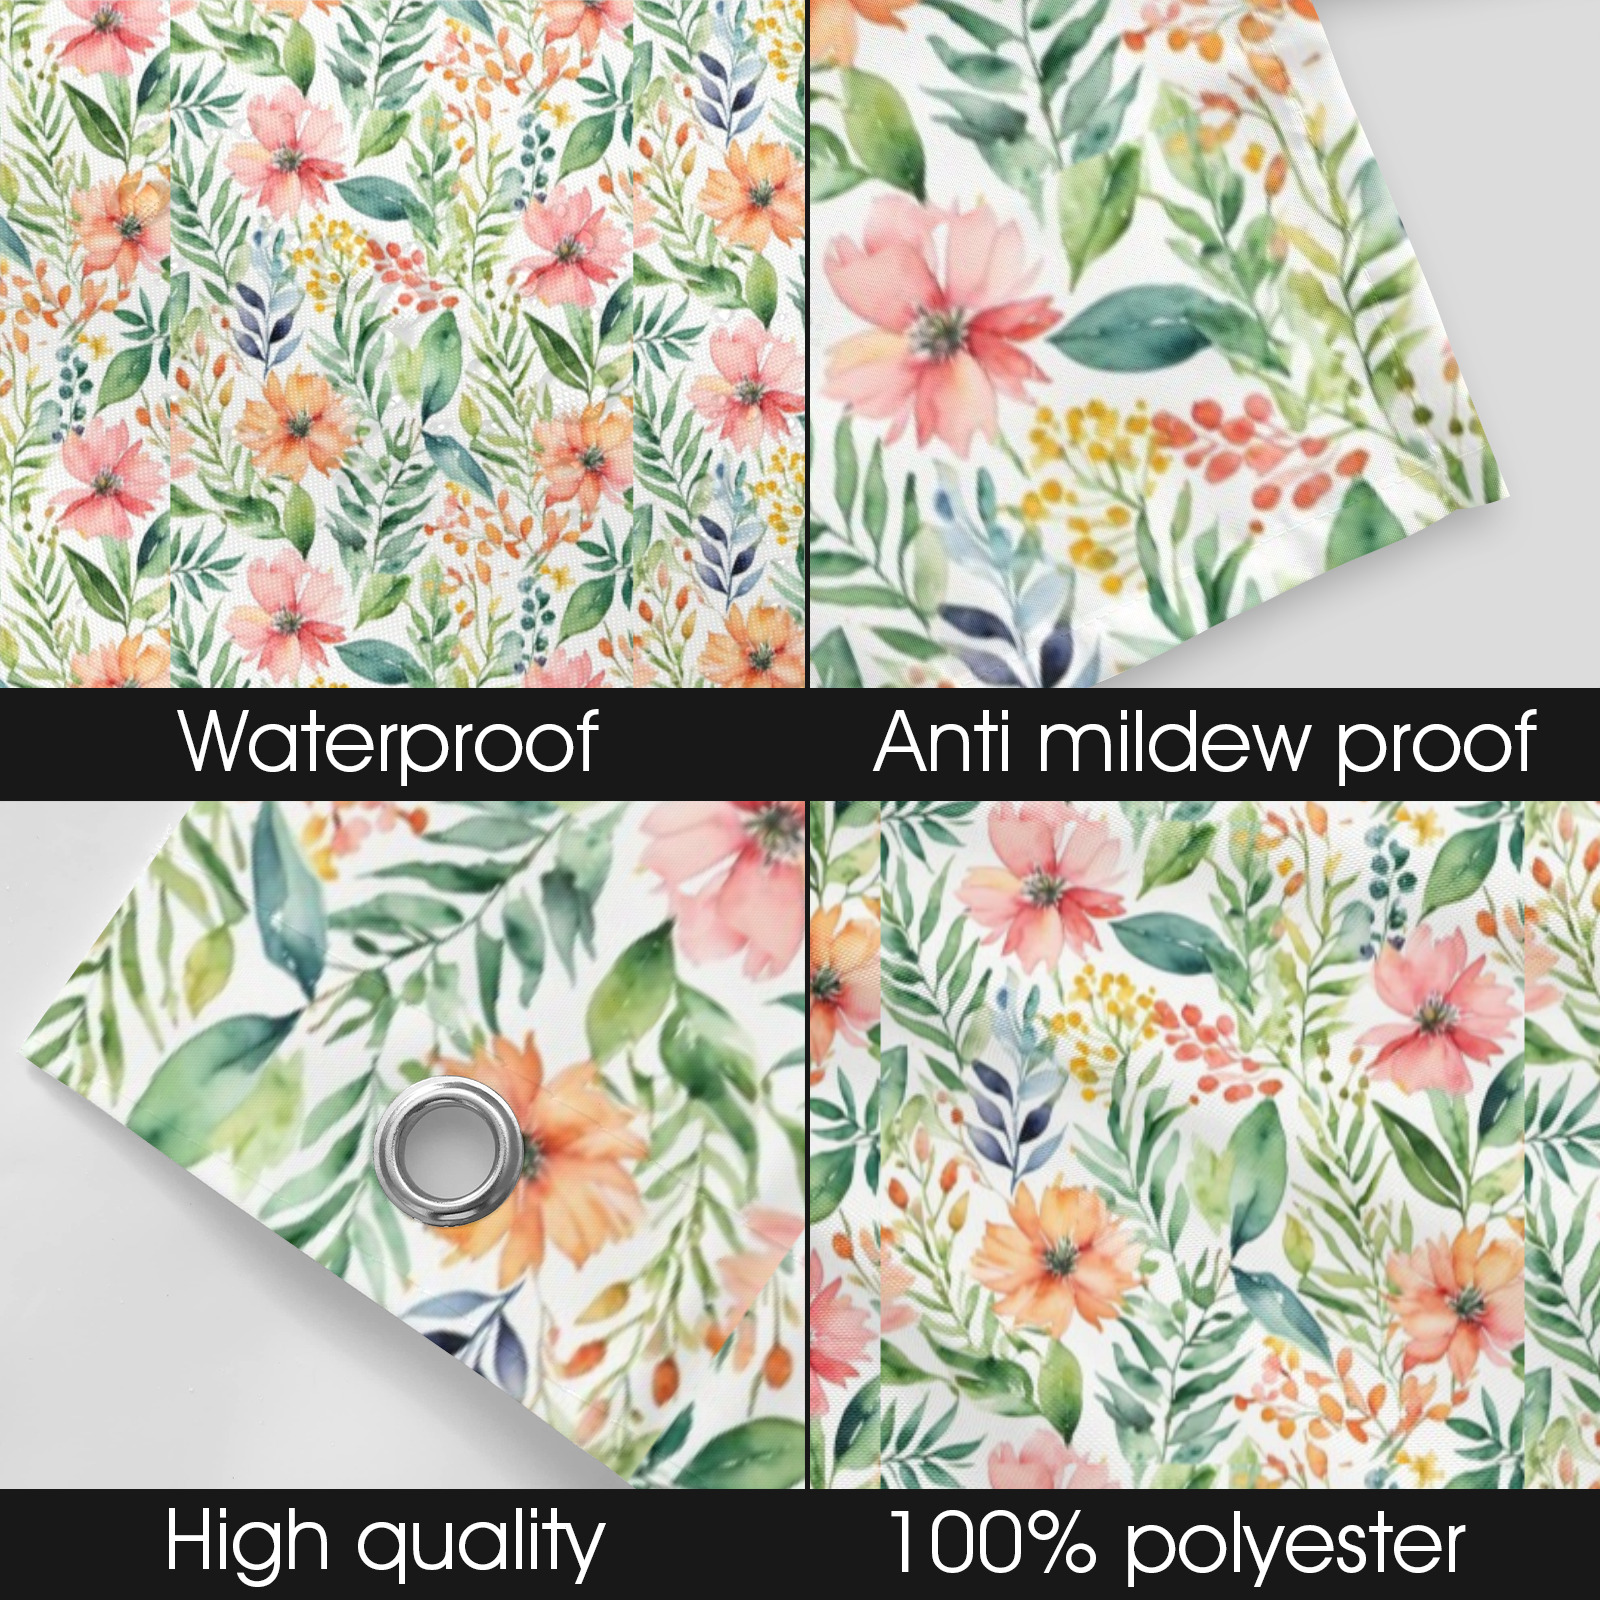 watercolor spring flowers pattern Shower Curtain 36"x72"